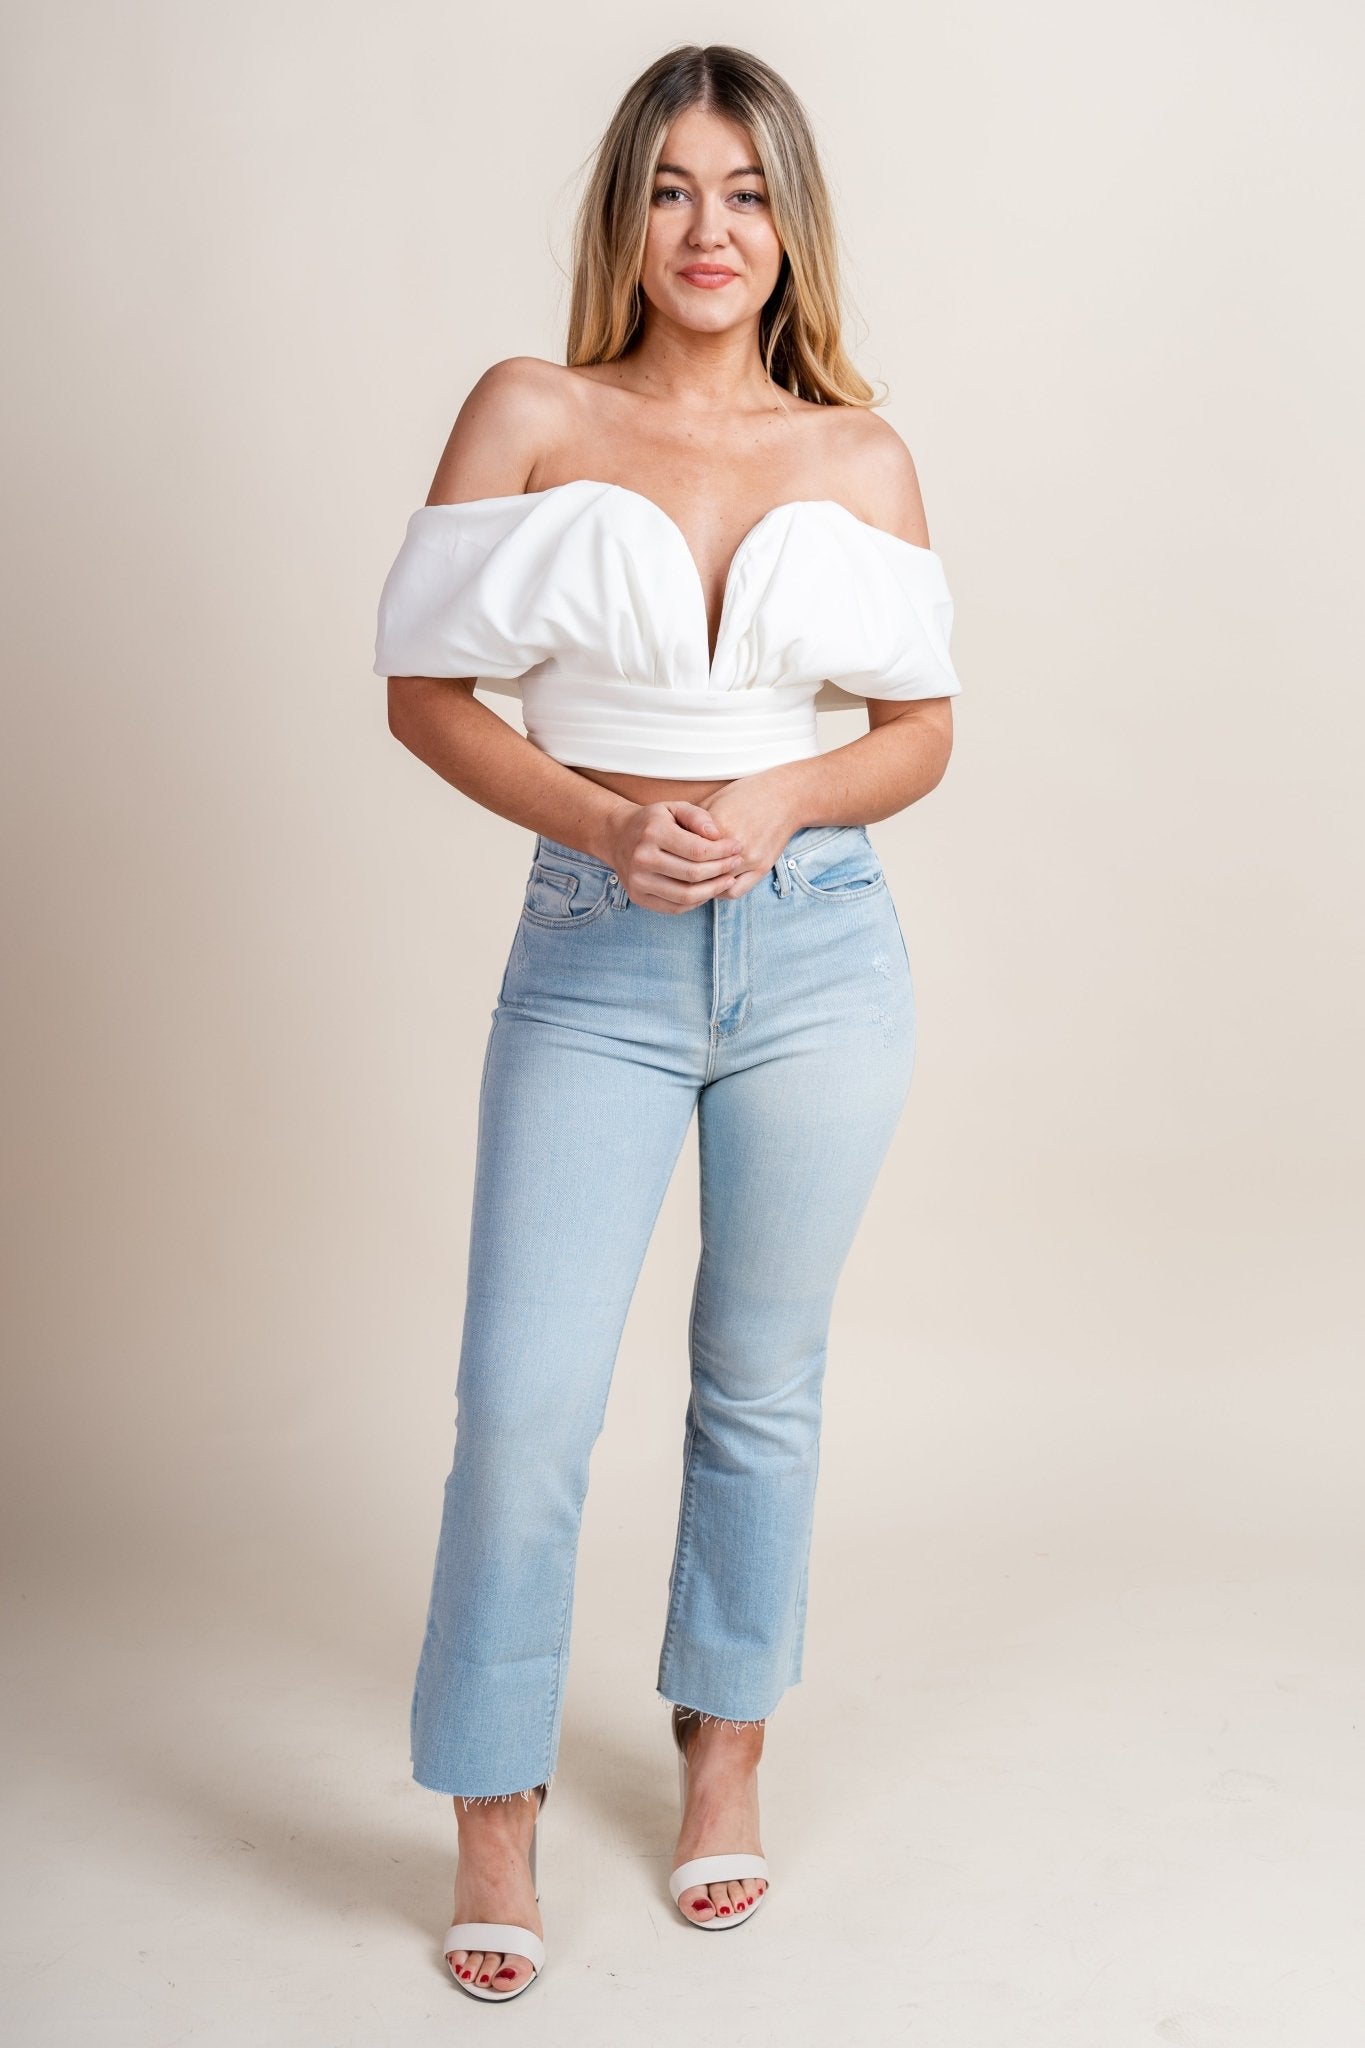 Off shoulder top cream - Cute Top - Trendy Bride and Bridesmaid Fashion at Lush Fashion Lounge Boutique in Oklahoma